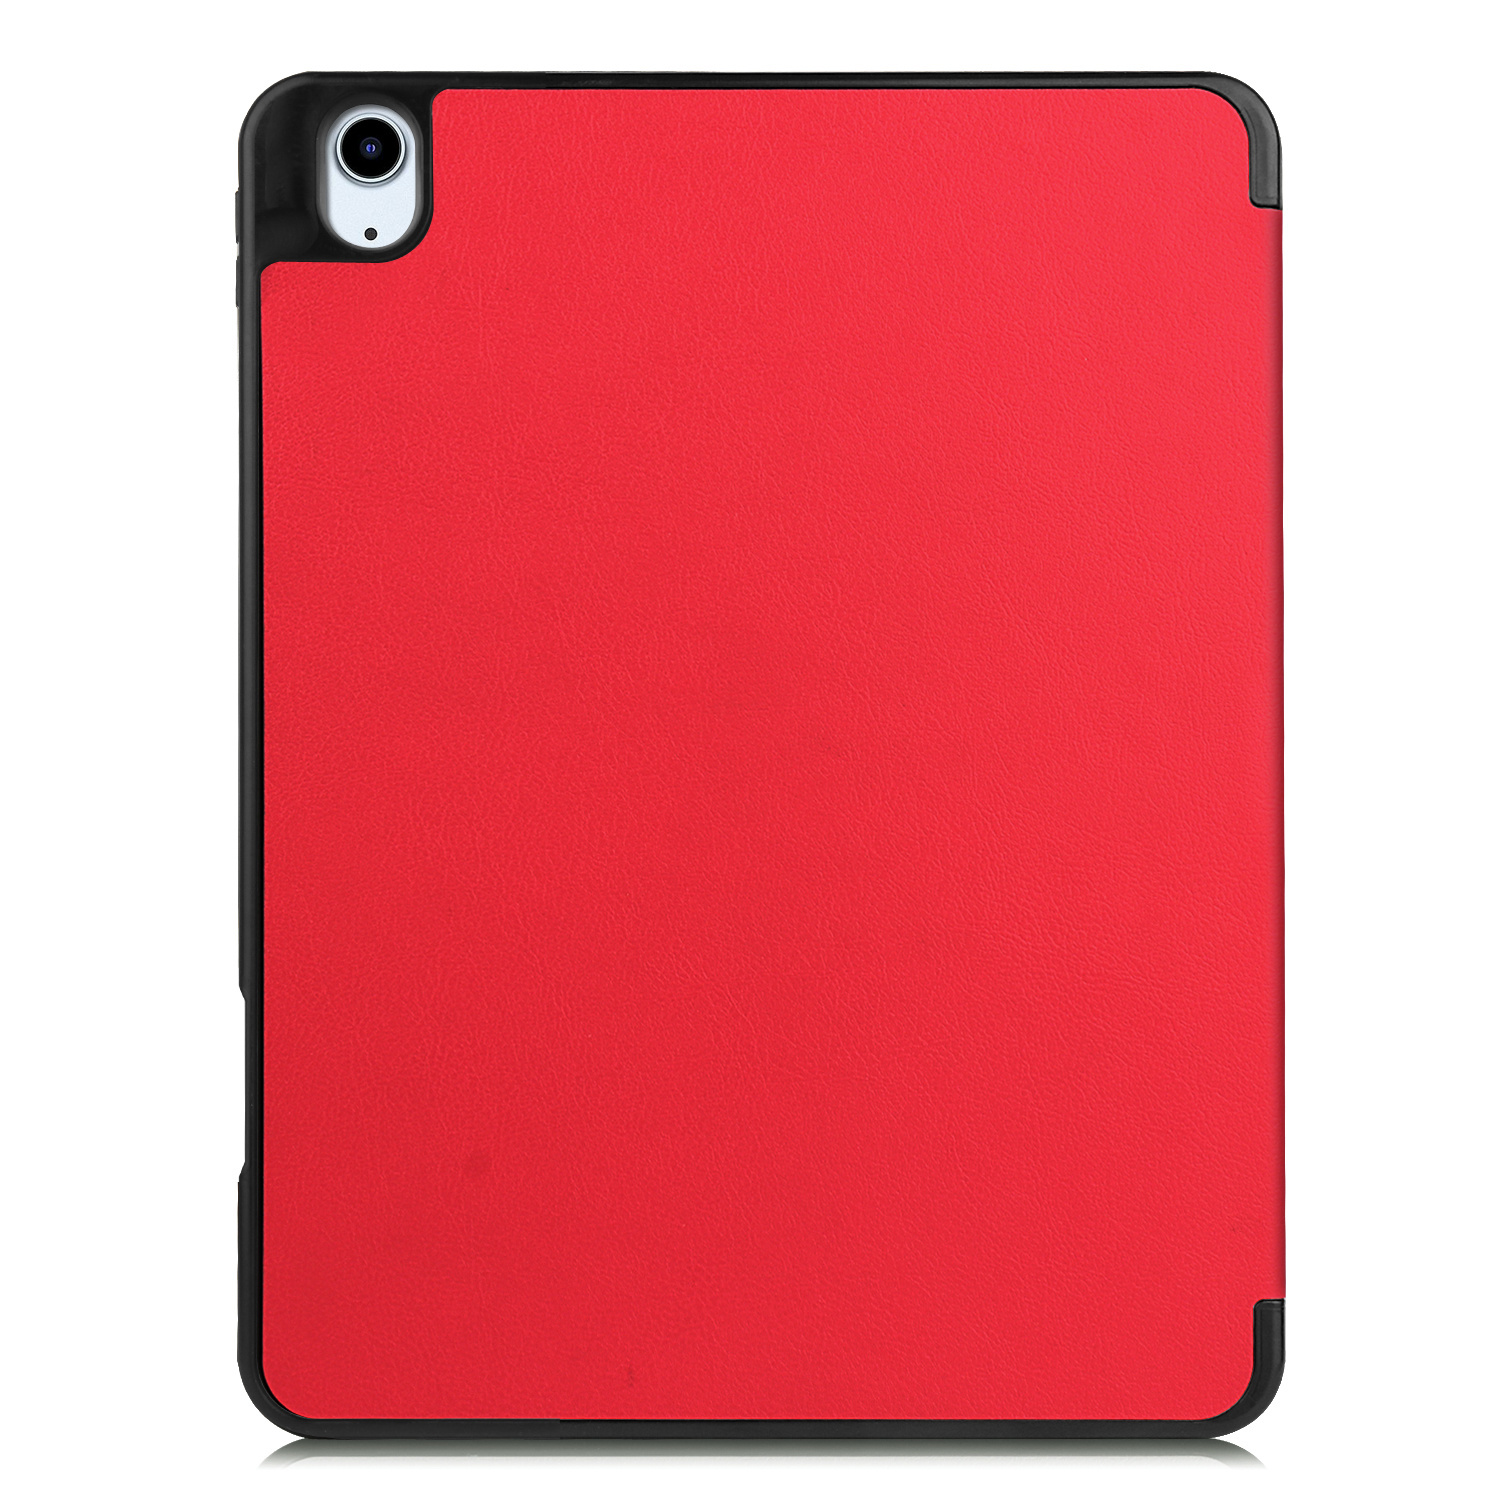 BASEY. iPad Air 5 2022 Hoes Met Screenprotector Rood - iPad Air 5 2022 Hoesje Uitsparing Apple Pencil Hard Cover Rood - iPad Air 5 2022 Bookcase Hoes Rood